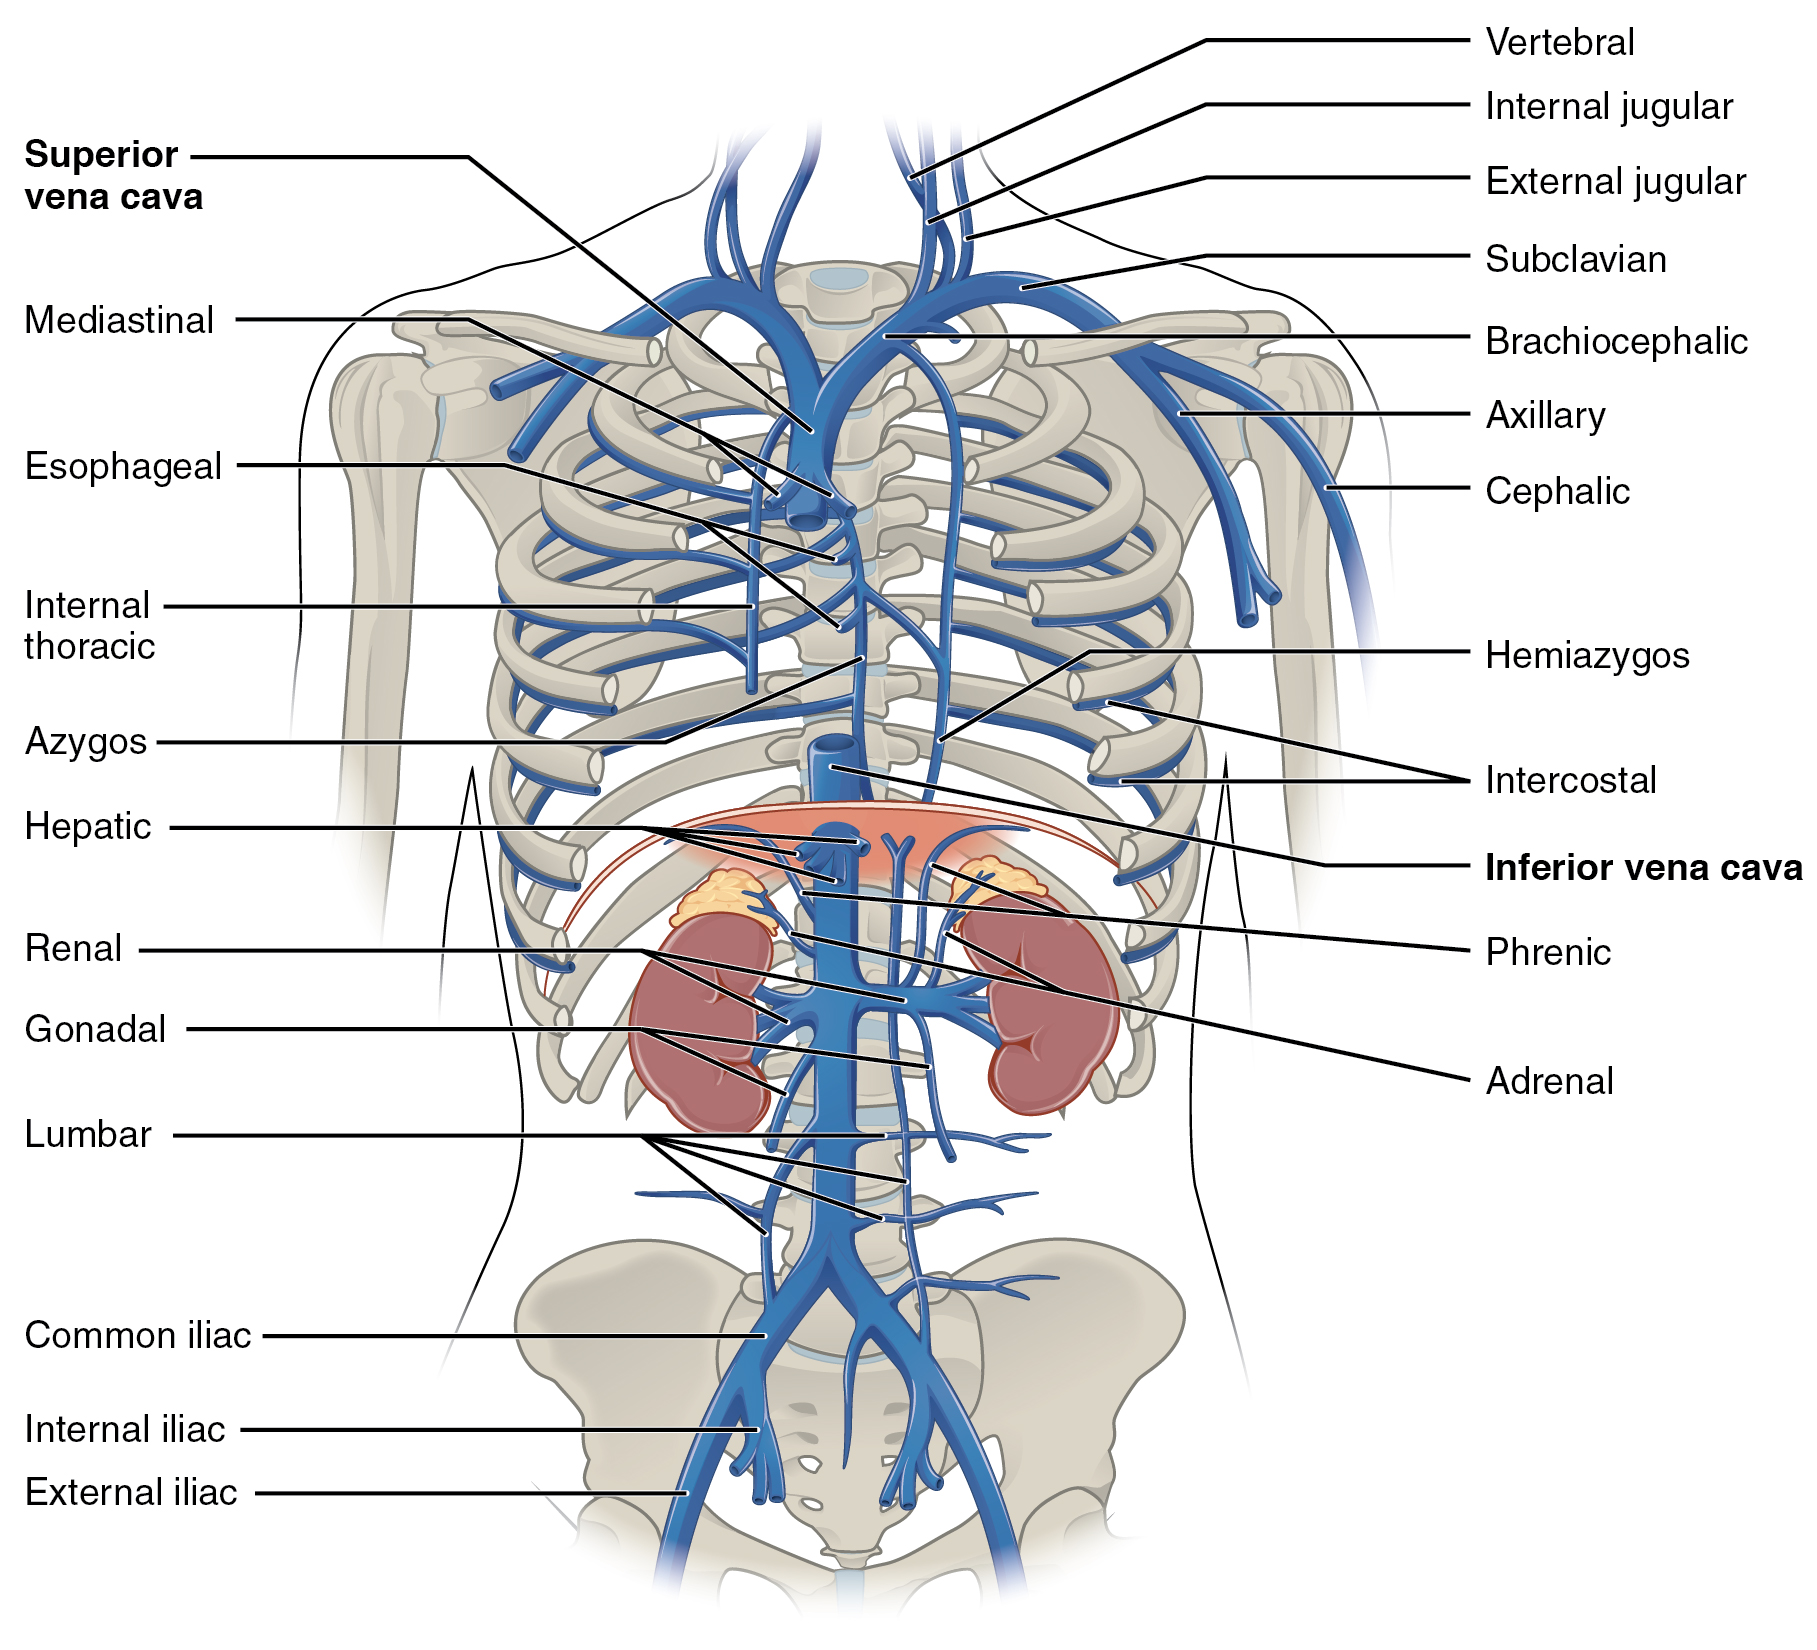 This diagram shows the veins present in the thoracic abdominal cavity.